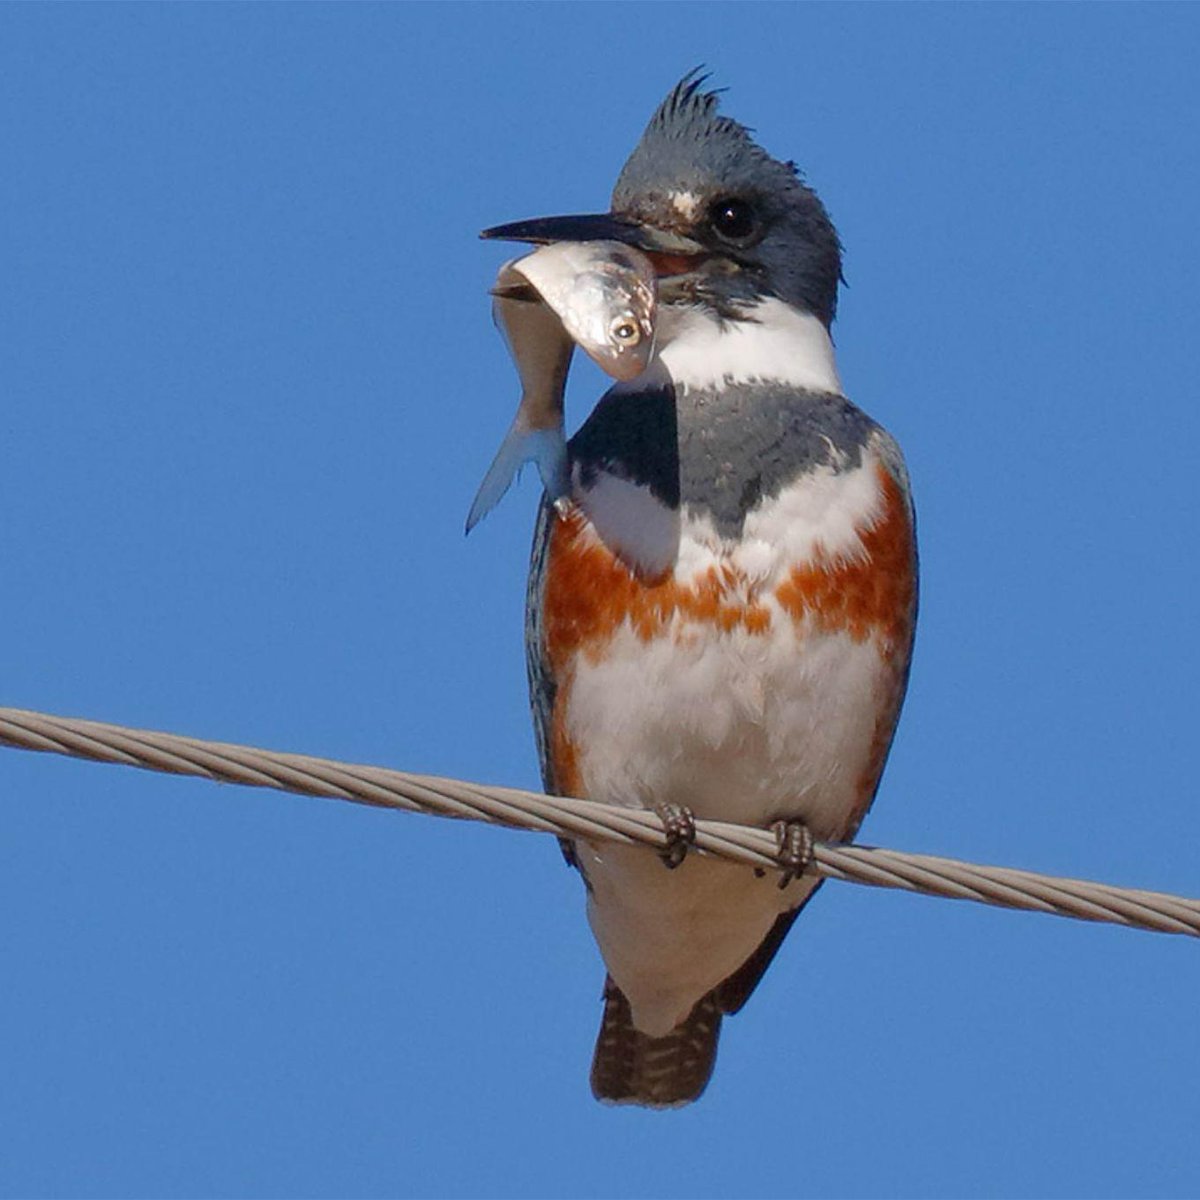 And I *would* give you the Belted Kingfisher, which is an awesome fucking hunting bird.But you're a threat to the one true Gospel of vinegar-based BBQ, with your molasses heathenry.So you know what? Keep it. Keep your mockingbird, Tennessee.Good riddance. #StayAtHomeSafari